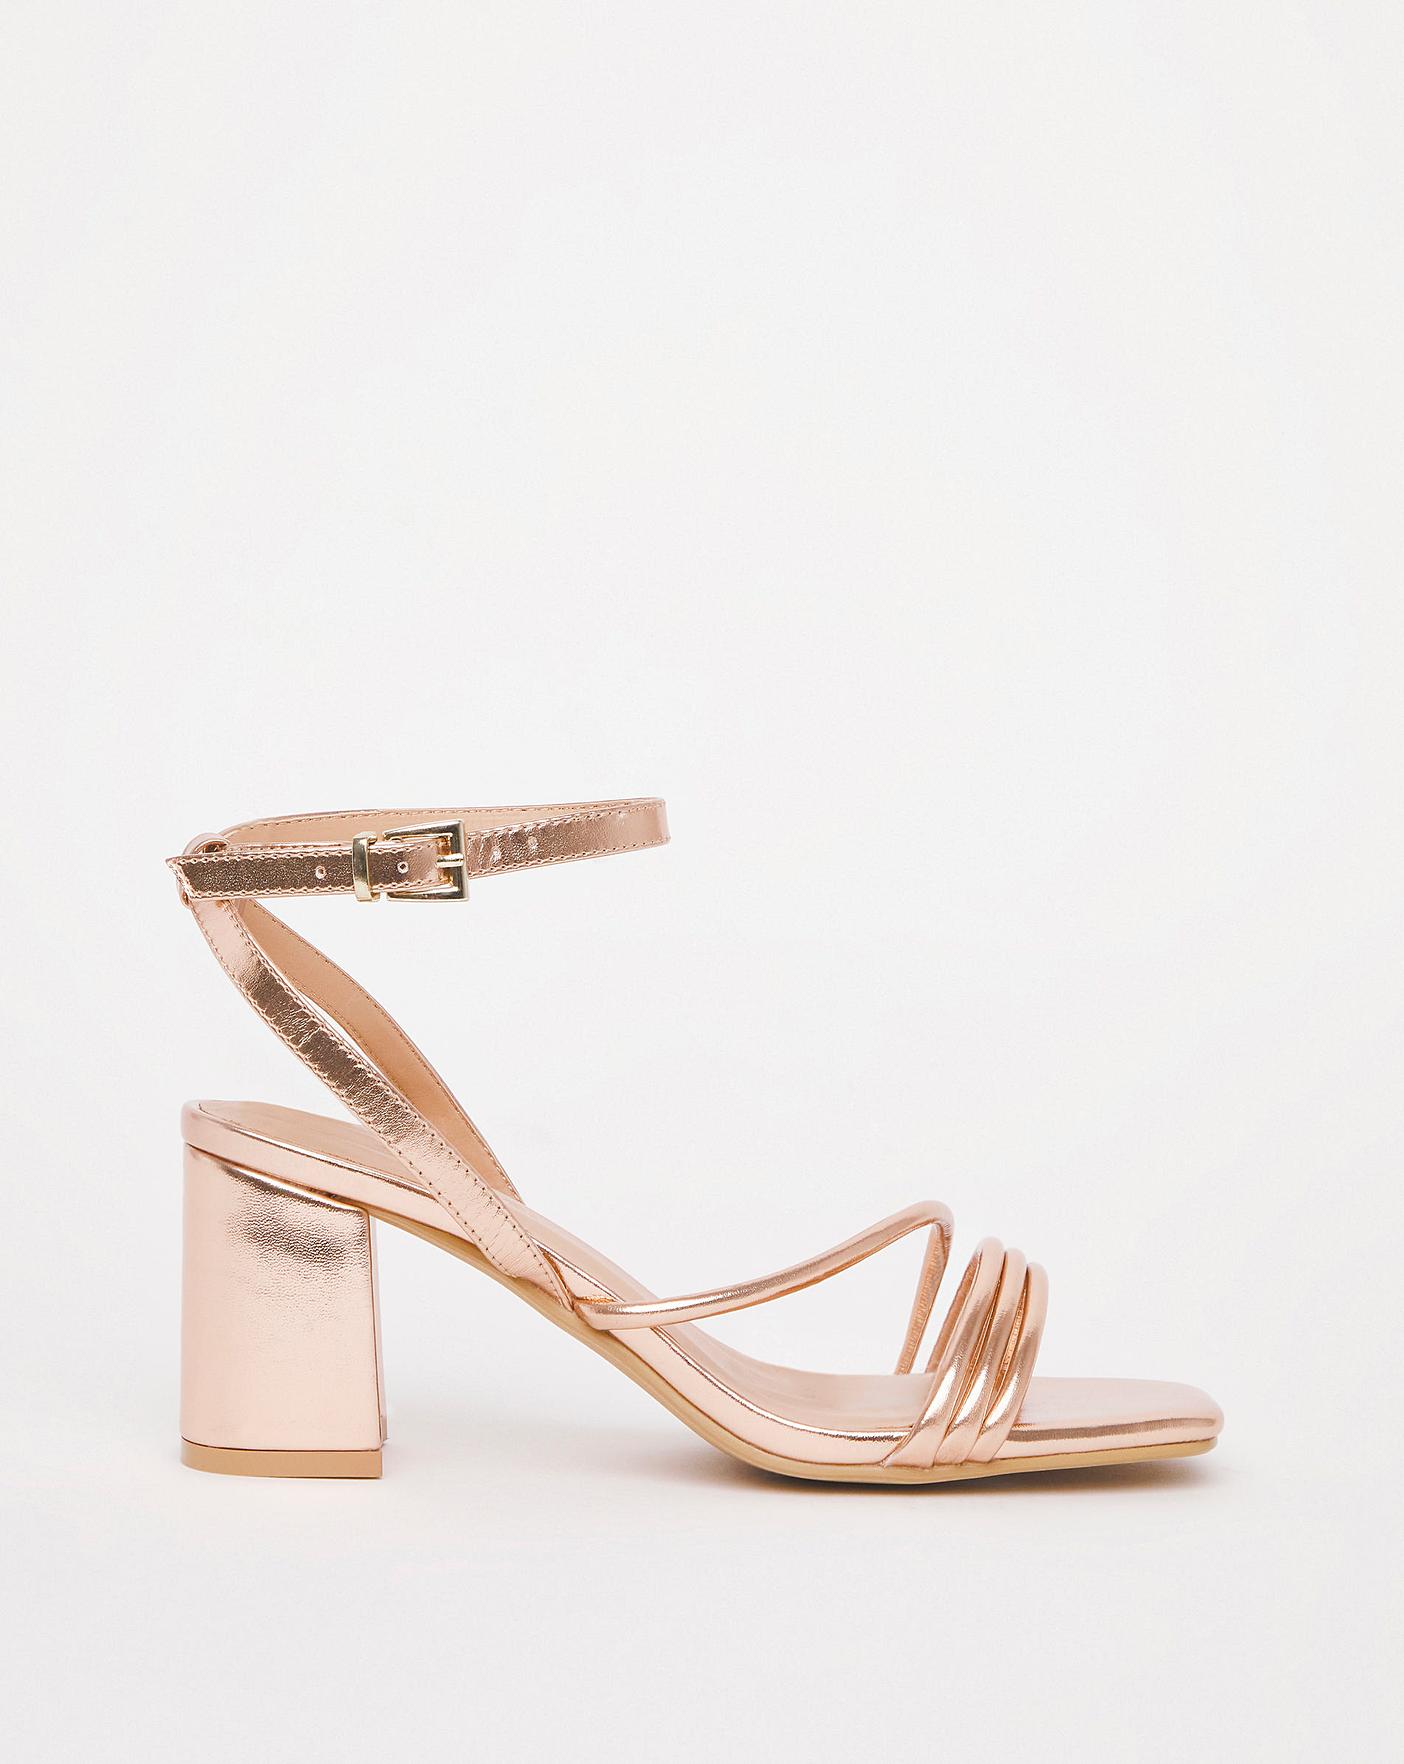 Wide Fit Peep Toe Gold Shiny Mid Heeled Sandals For Wedding/party With  Ankle Strap For Women | SHEIN ASIA